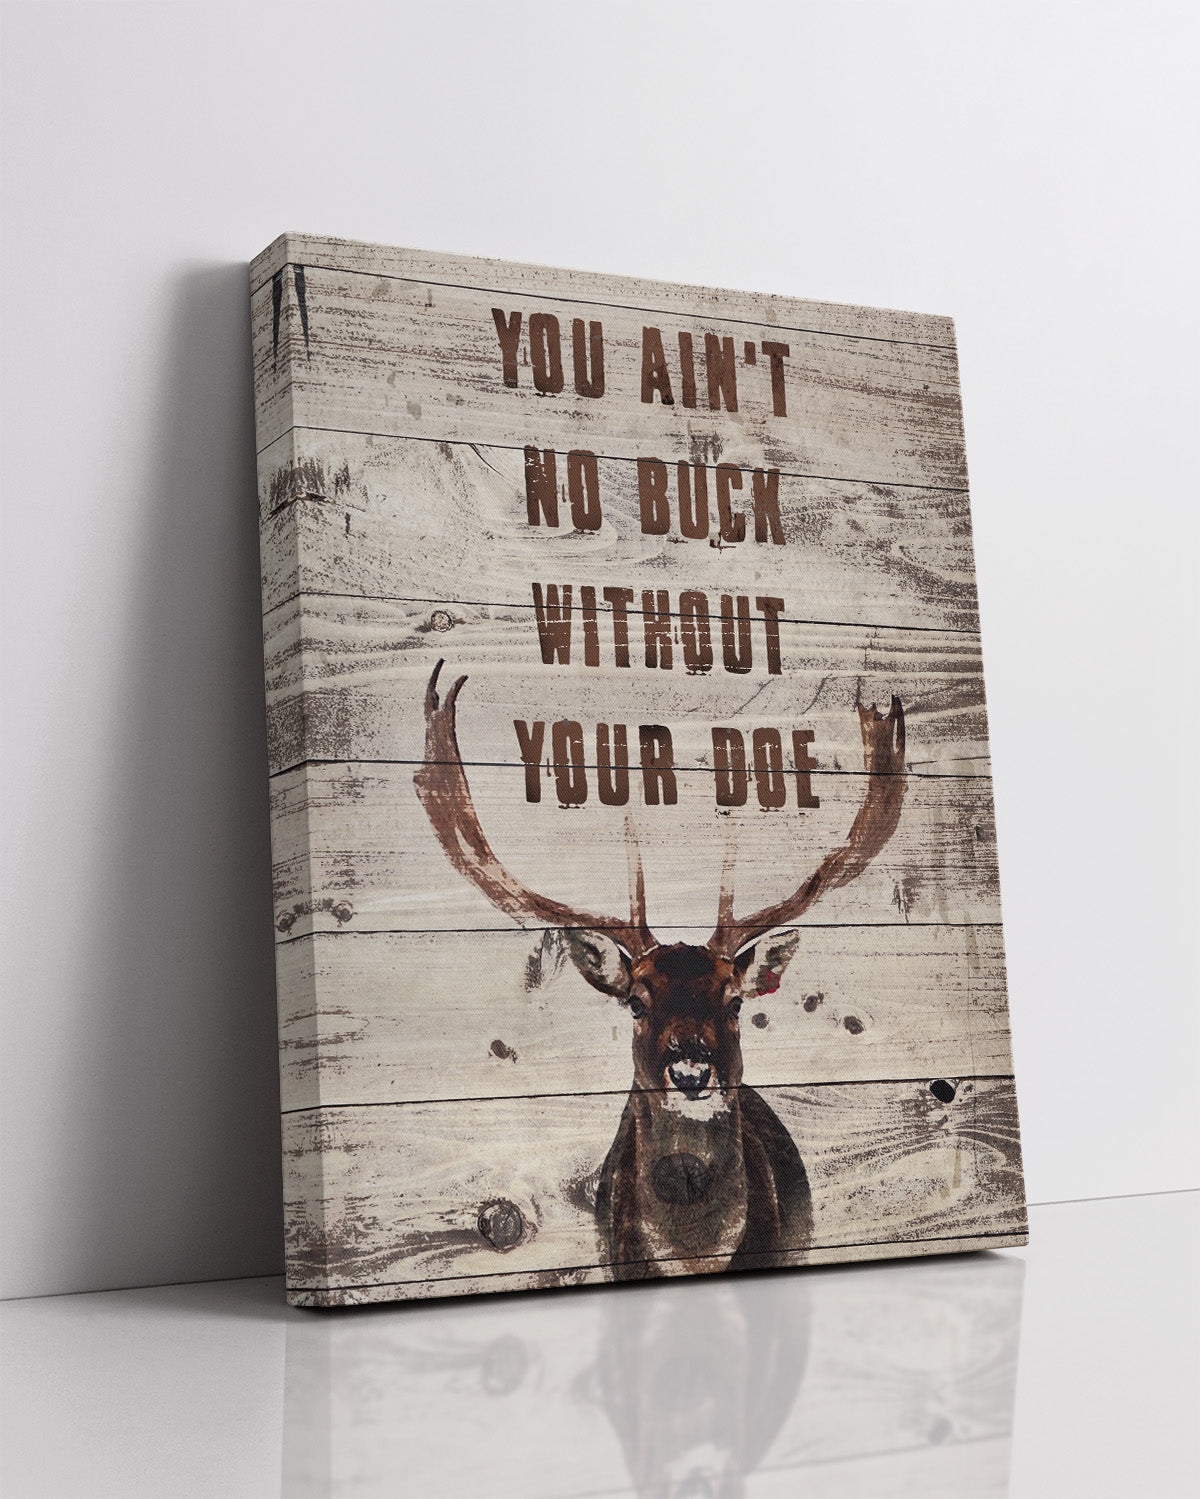 You Ain't No Buck Without Your Doe - Hunting Decor - Hunting Wall Art Decor - Gifts for Hunters - Rustic Hunting Cabin Decor - Farmhouse Hunting Wall Decor